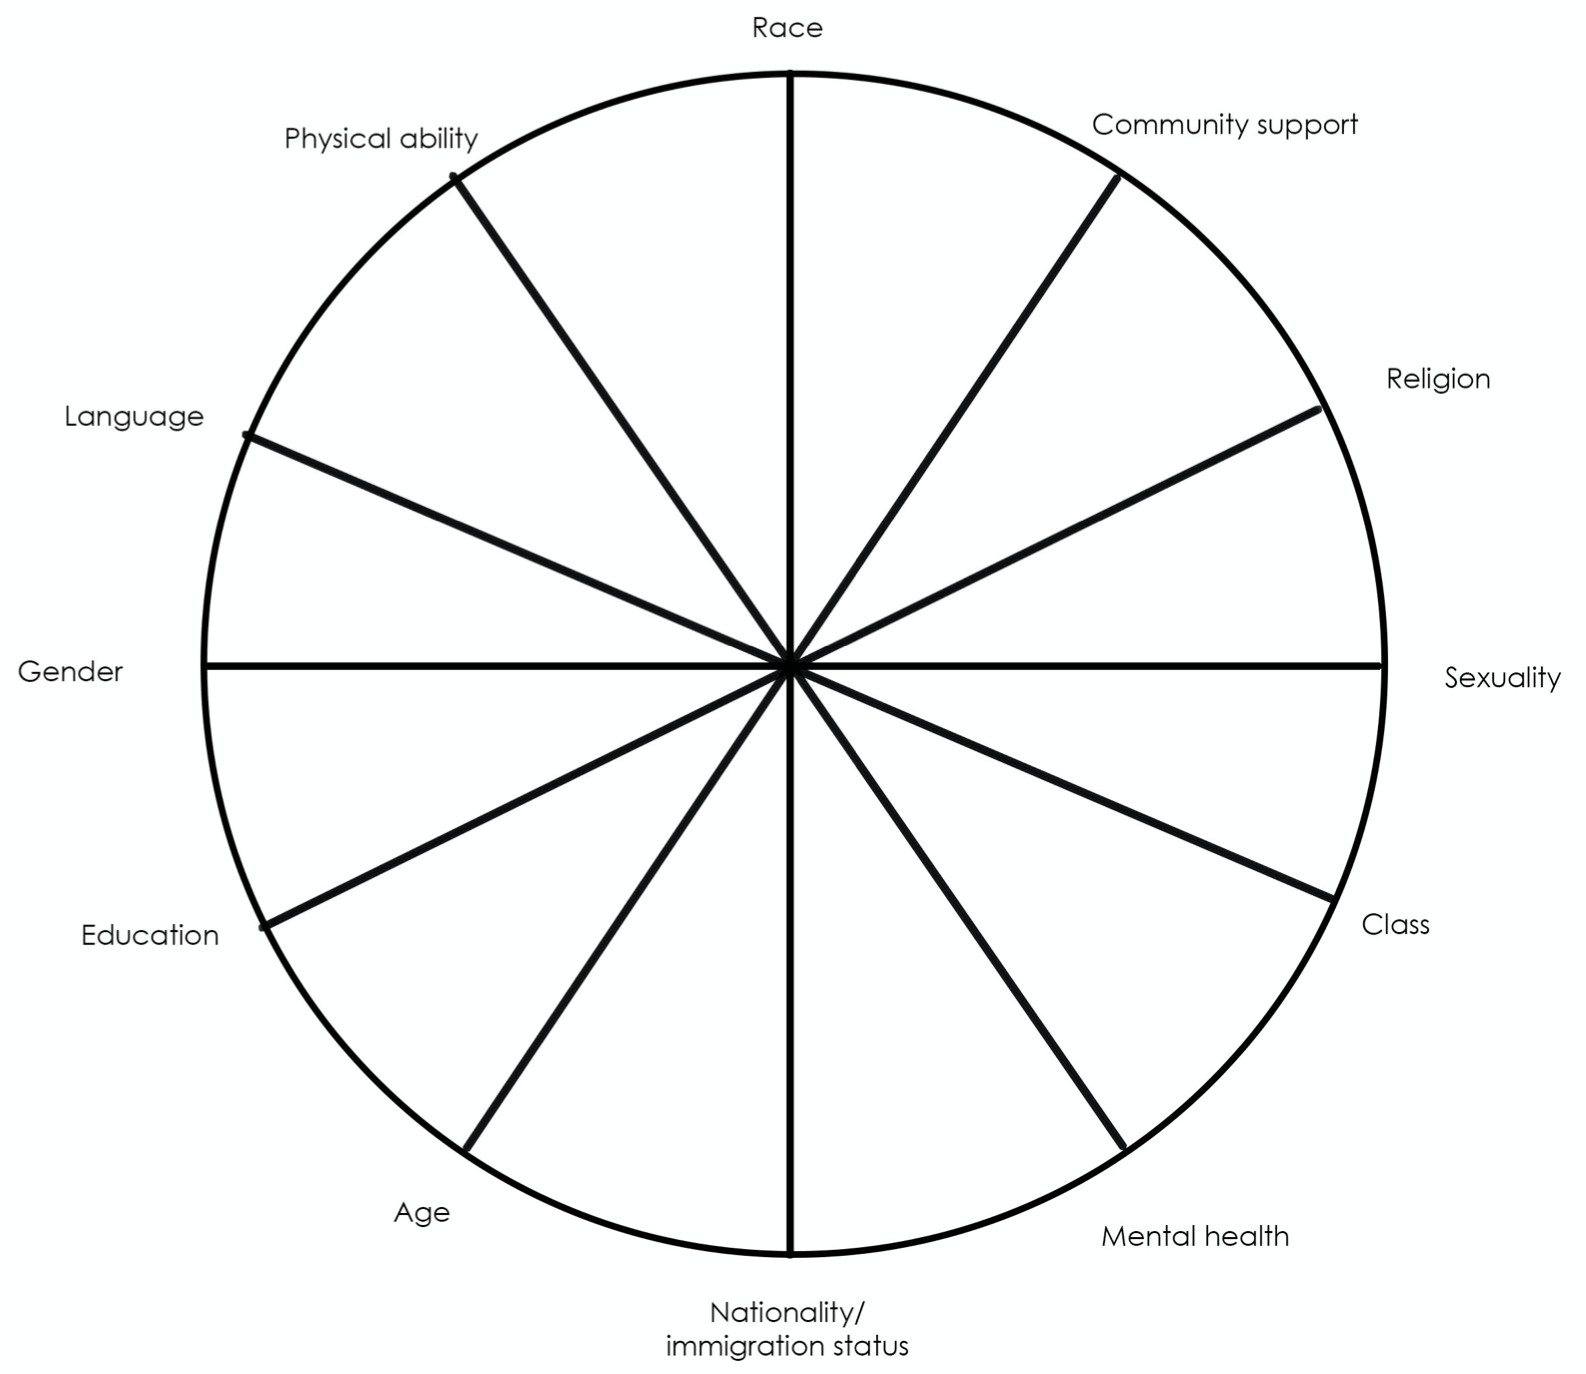 A wheel with spokes for various social identities: race, community support, religion, sexuality, class, mental health, nationality/immigration status, age, education, gender, language, and physical ability.